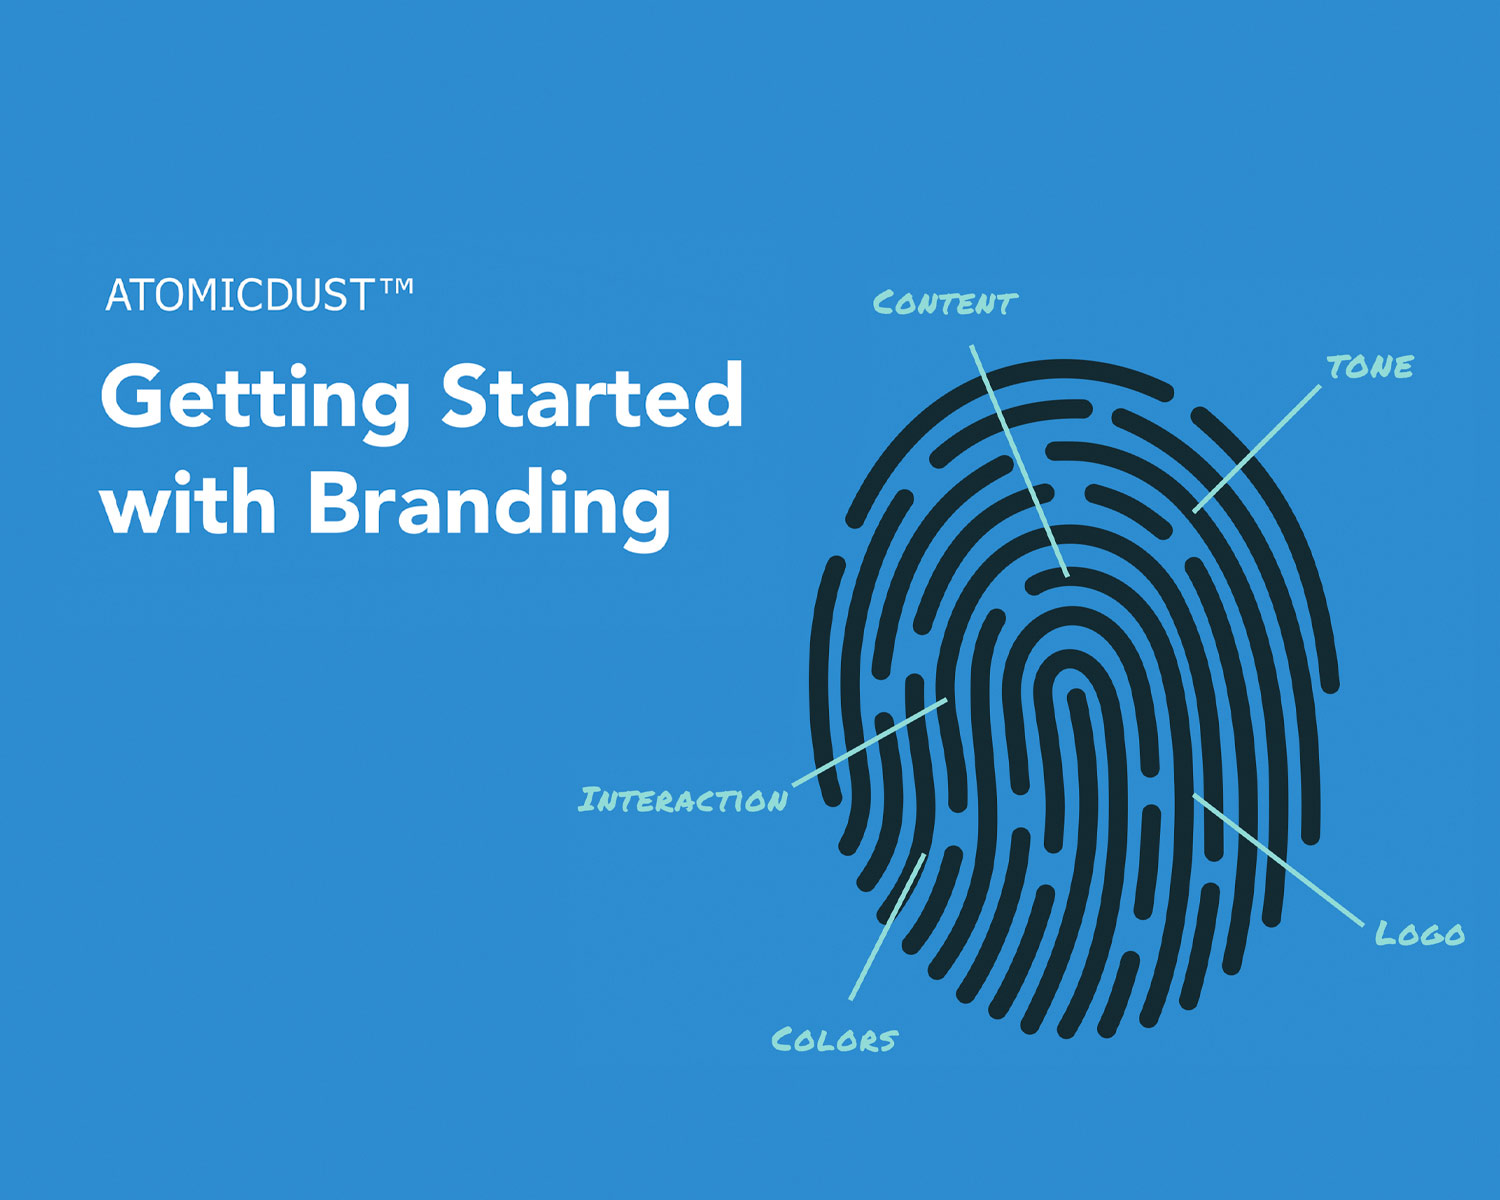 The cover of Getting Started With branding includes an illustration of a fingerprint and labels including content, interaction, colors, tone and logo